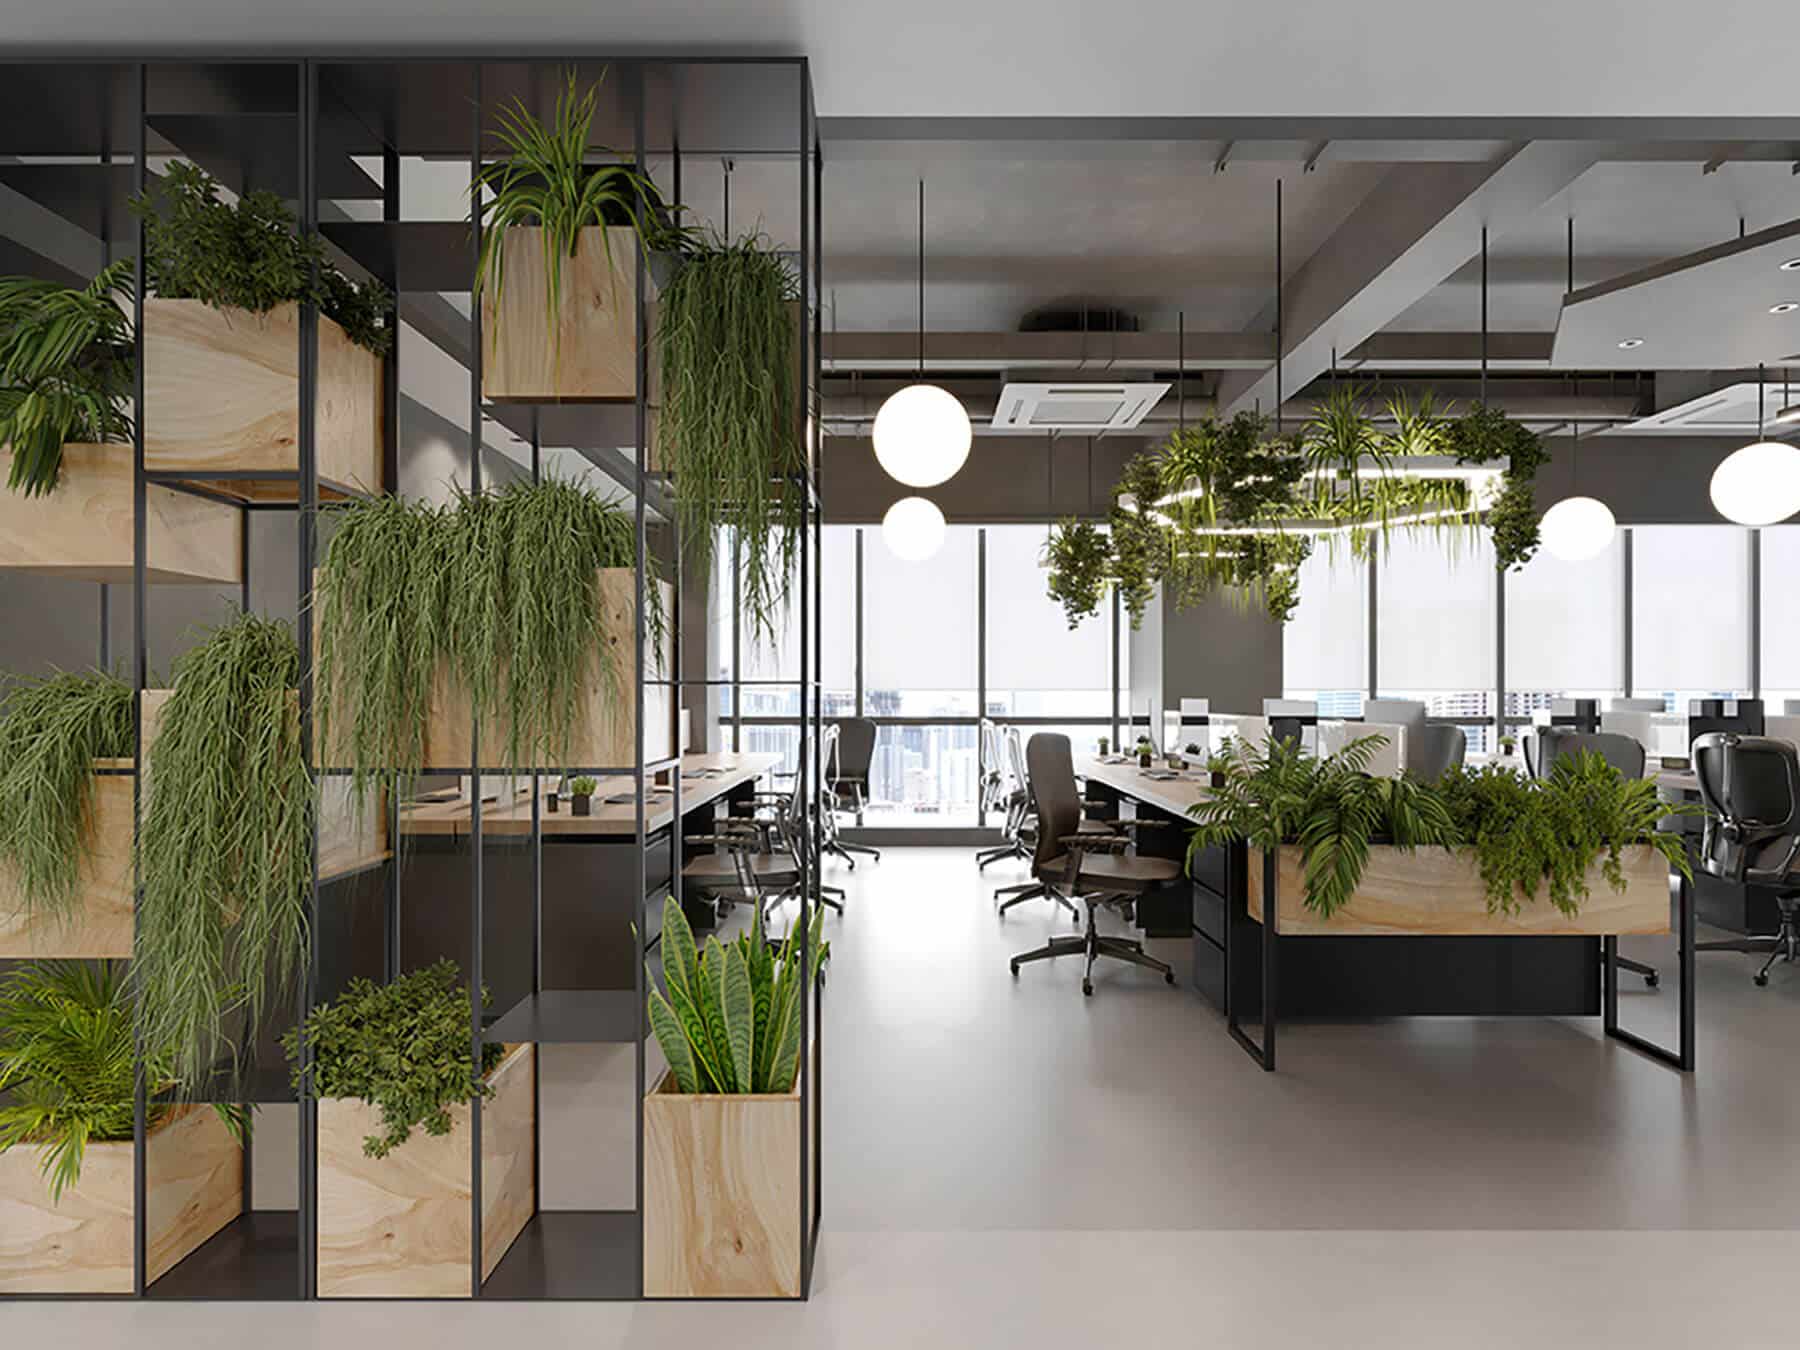 Desks in a sustainable office